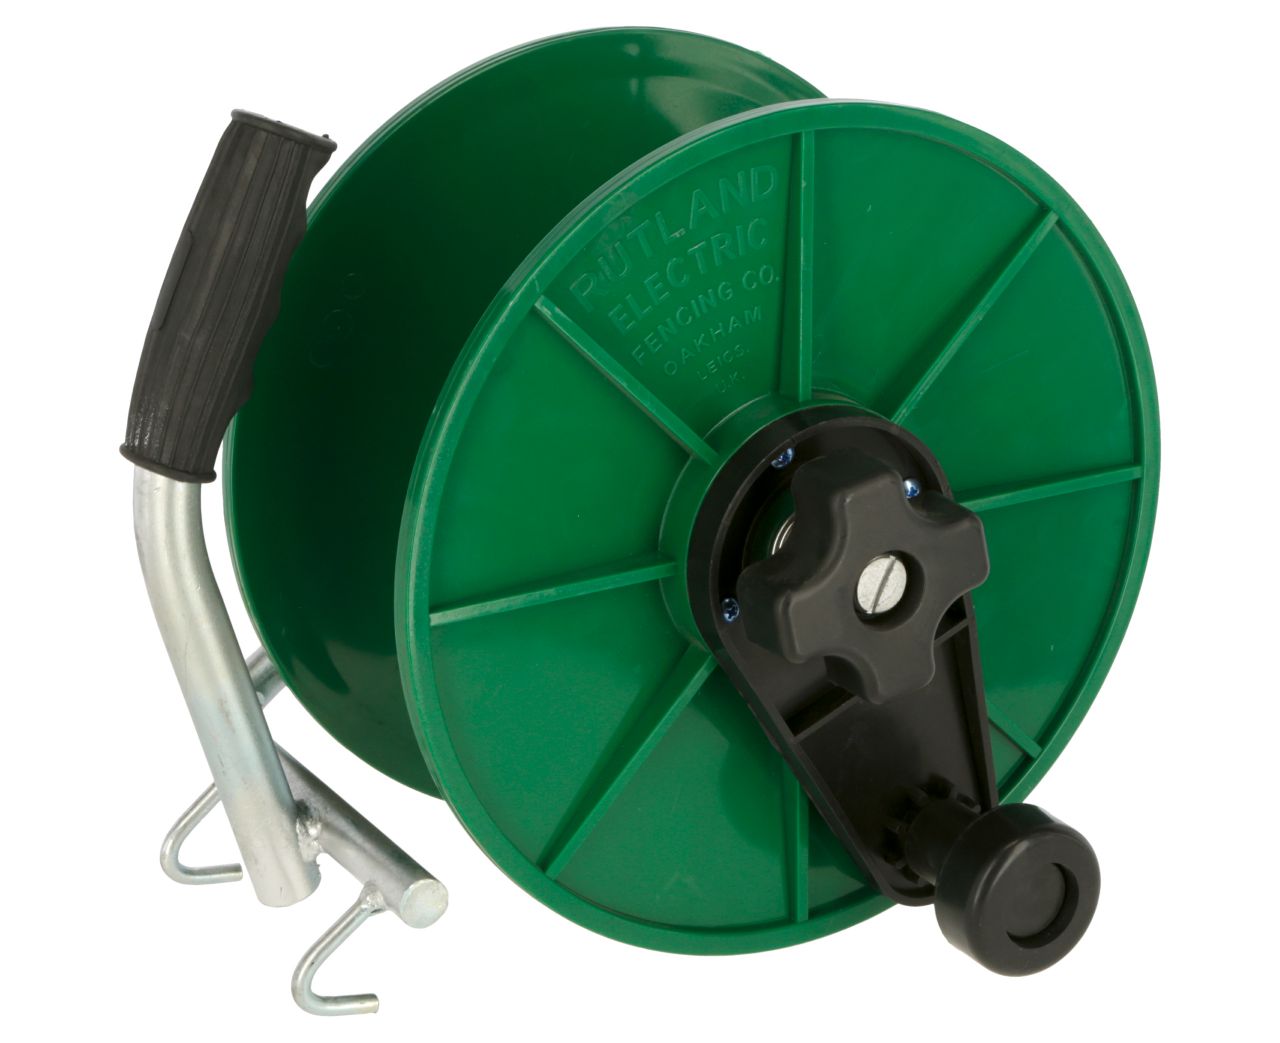 Hand Mounted Self-Insulated Reel